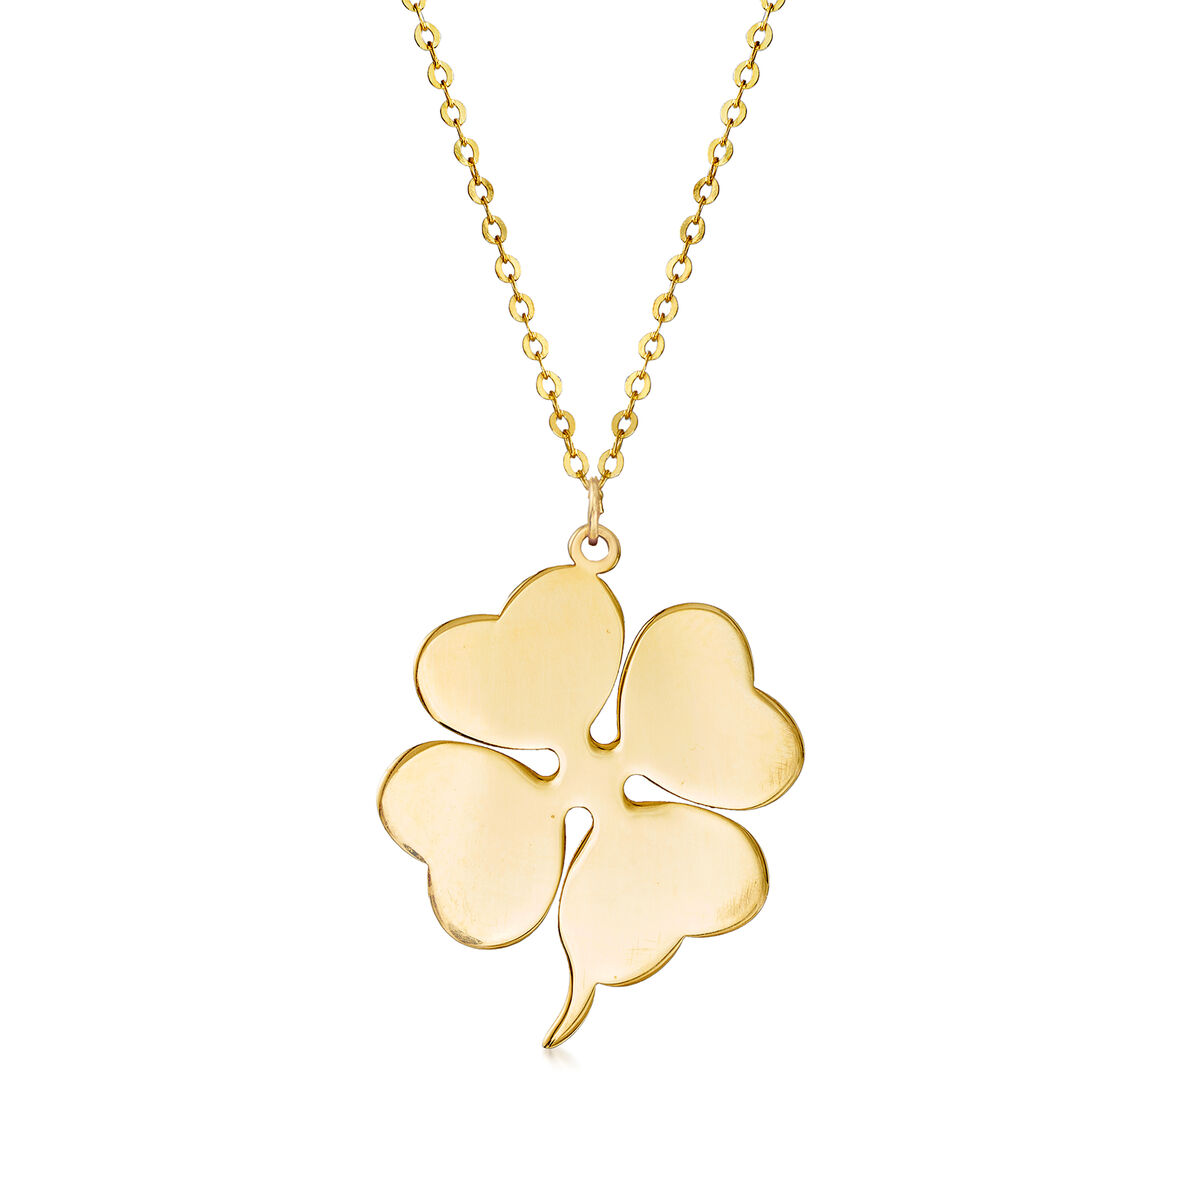 Italian 14kt Yellow Gold Four-Leaf Clover Necklace | Ross-Simons